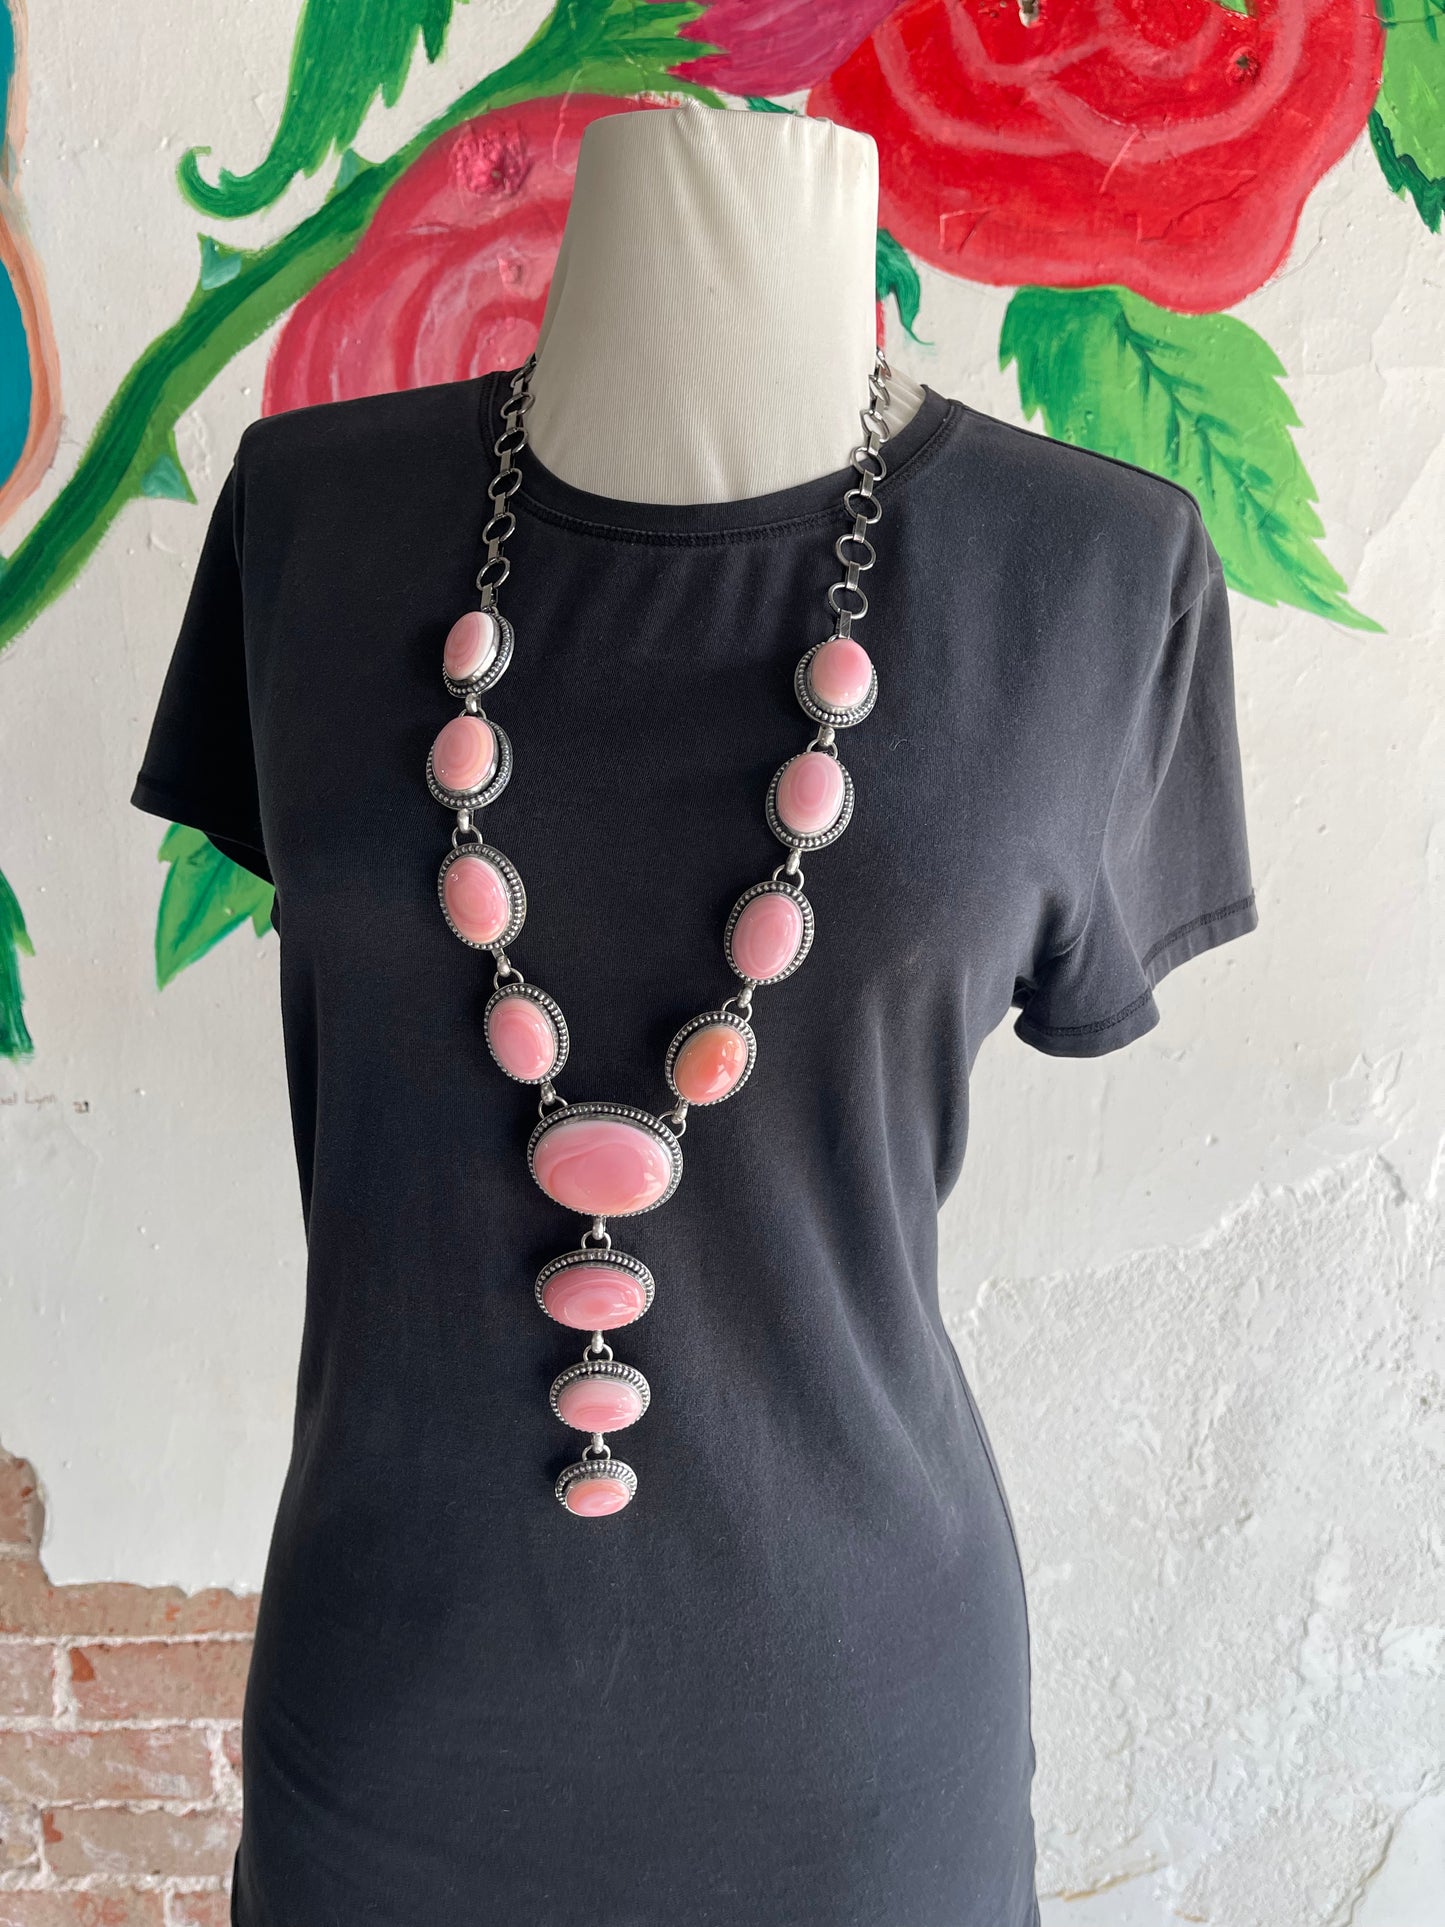 Cotton Candy (Pink Conch Shell) Lariat 32" Necklace